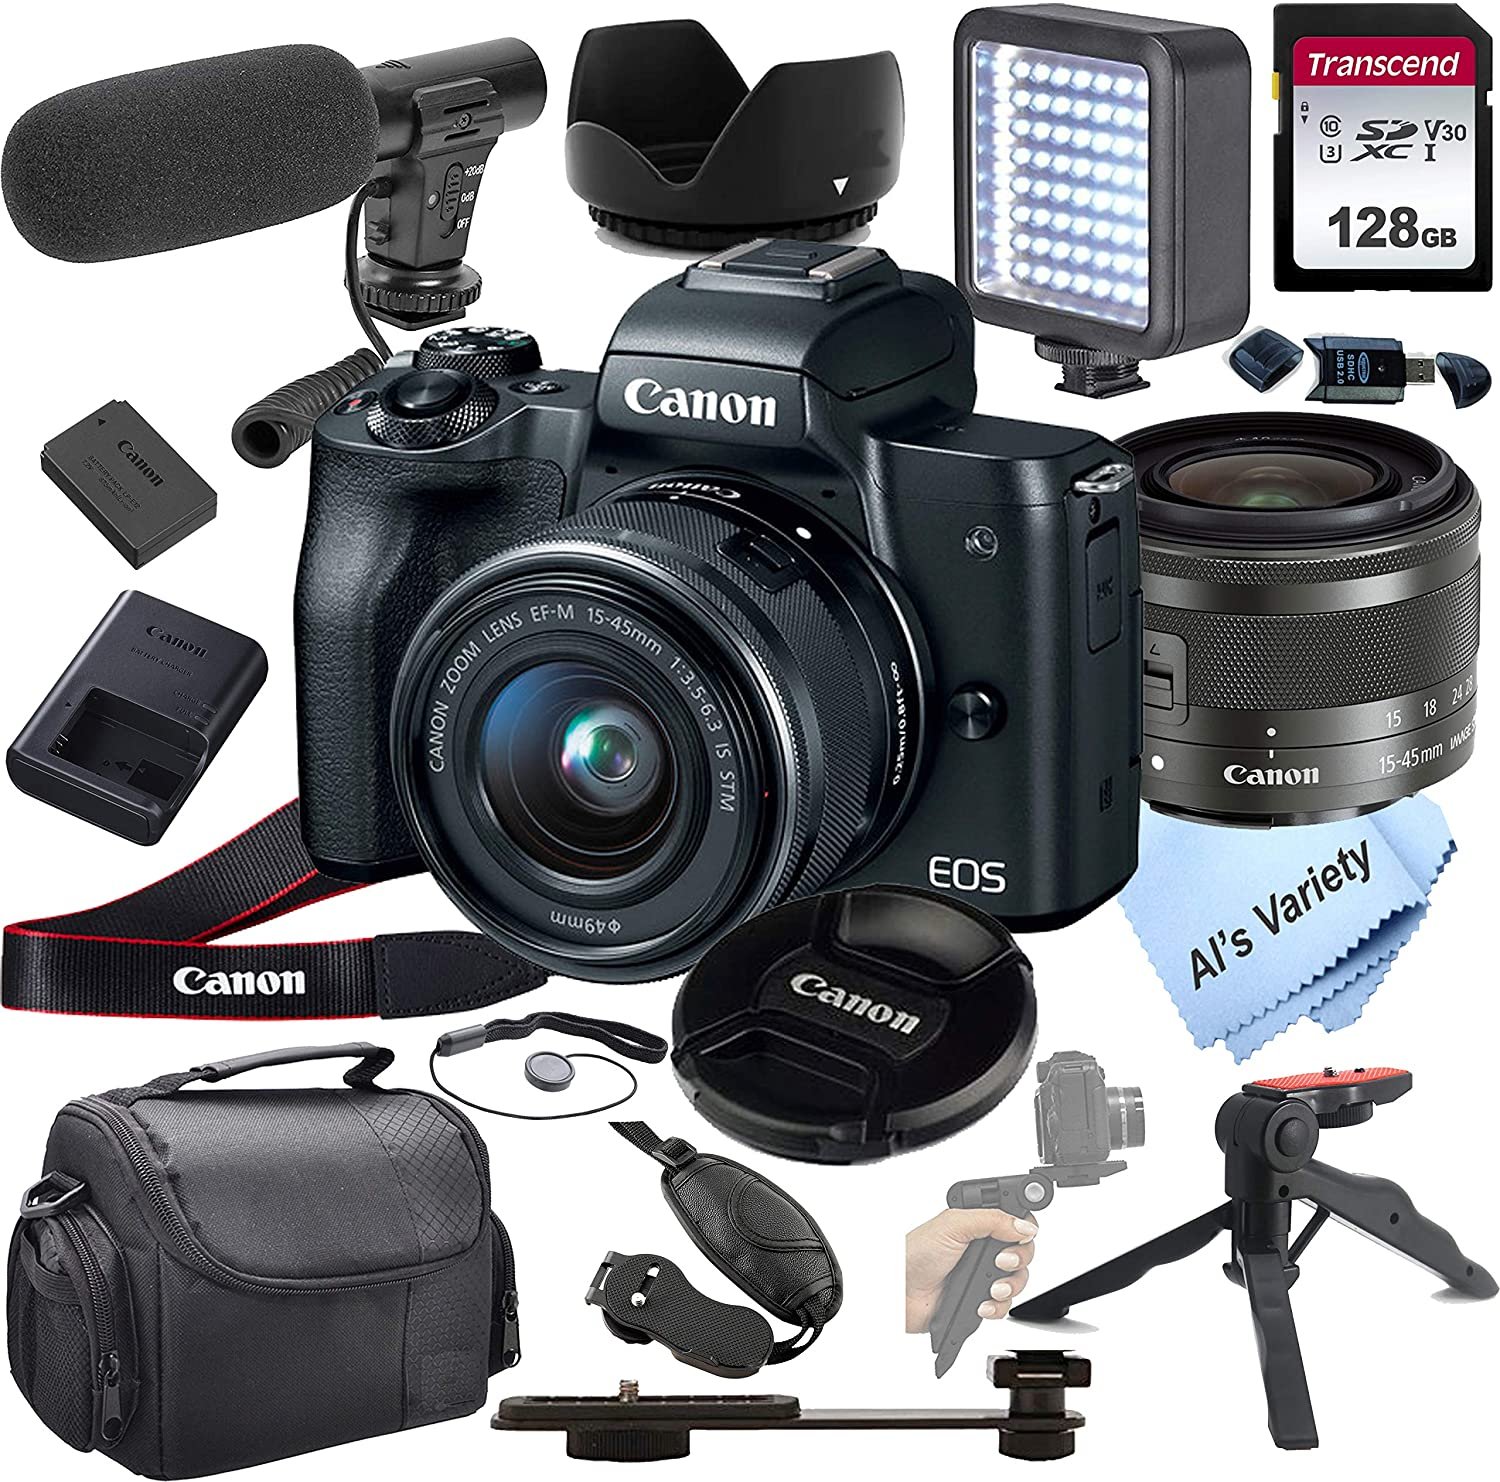 Canon EOS M50 Mirrorless Digital Camera Video Kit with 15-45mm Zoom Lens + Shot-Gun Microphone + LED Always on Light+ 128GB Card, Gripod, Case, and More 18pc Video Bundle - image 1 of 8